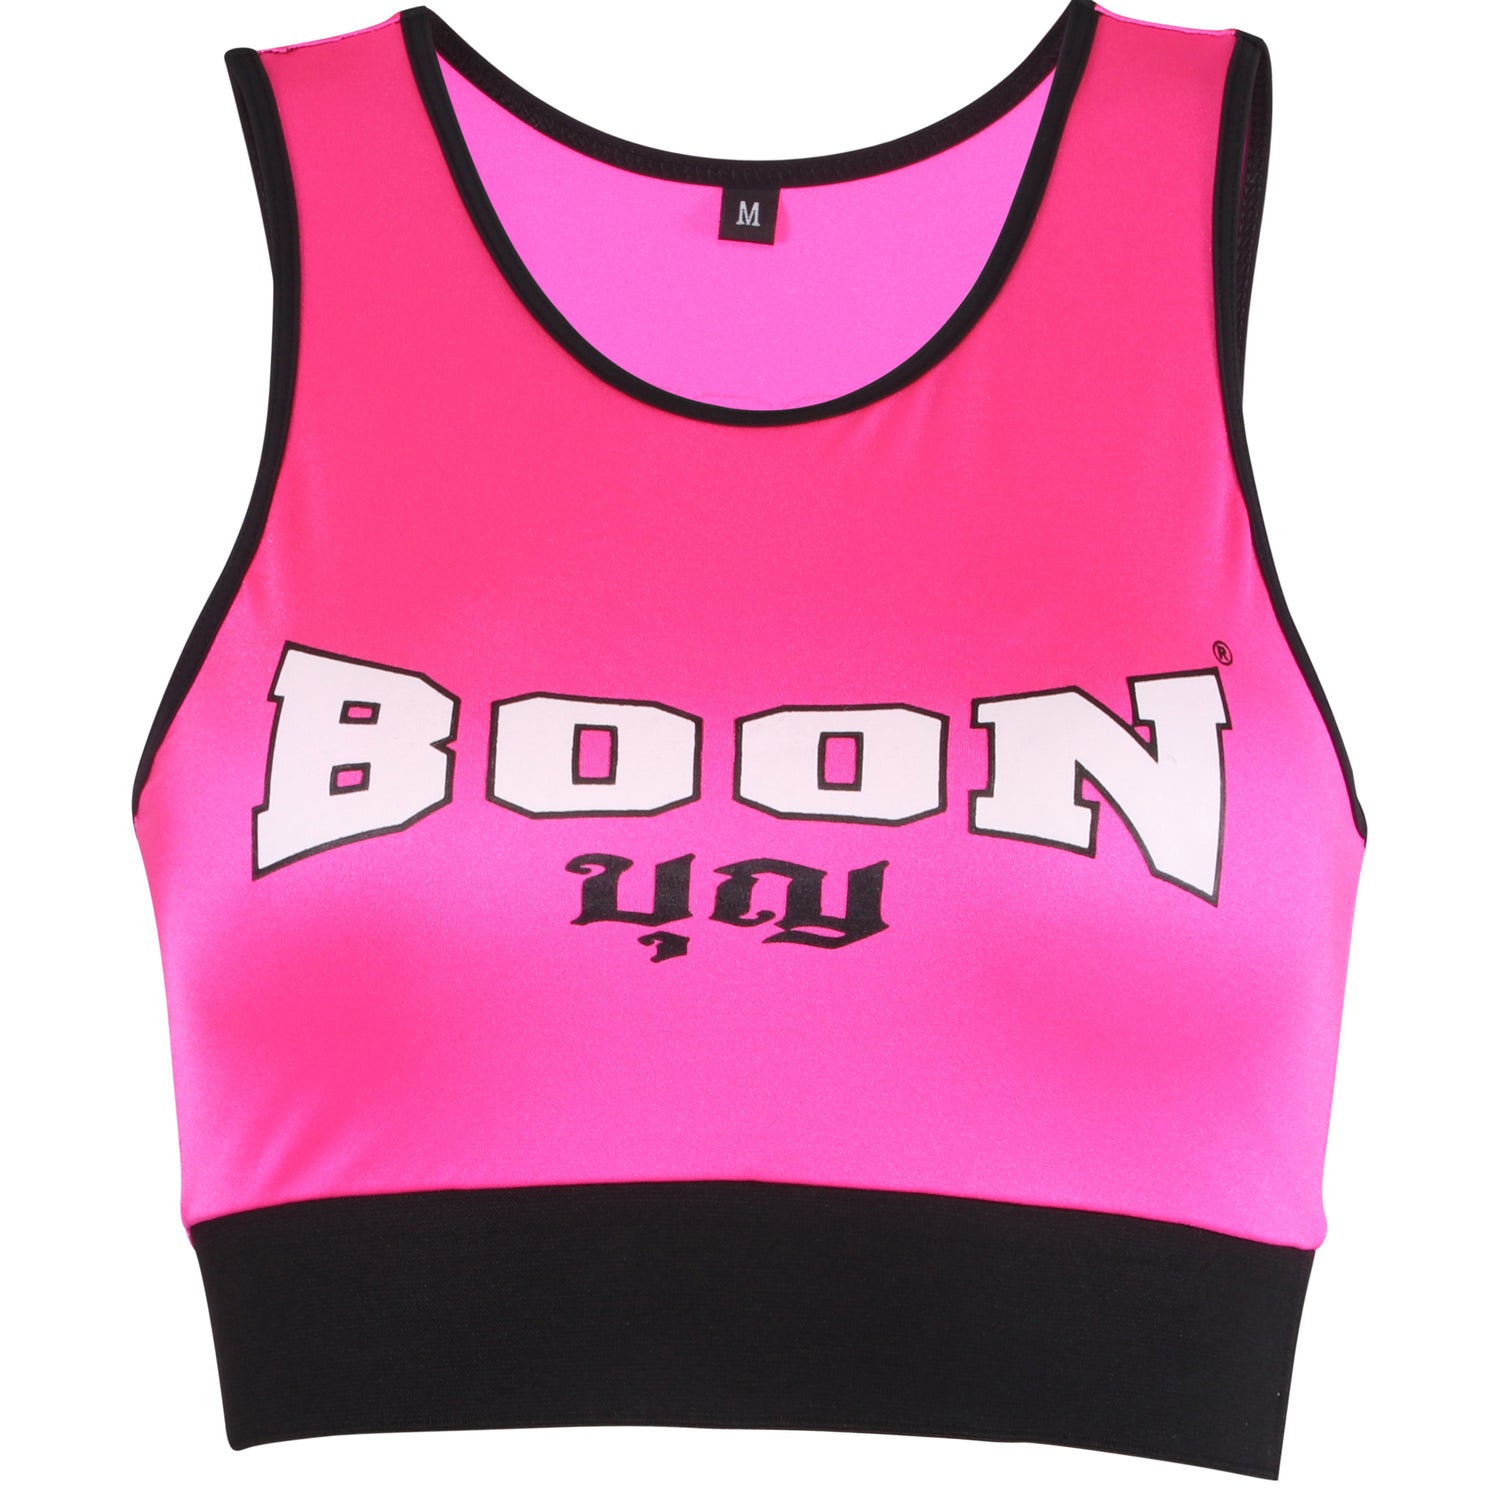 Hot Pink Fight Top FTHP